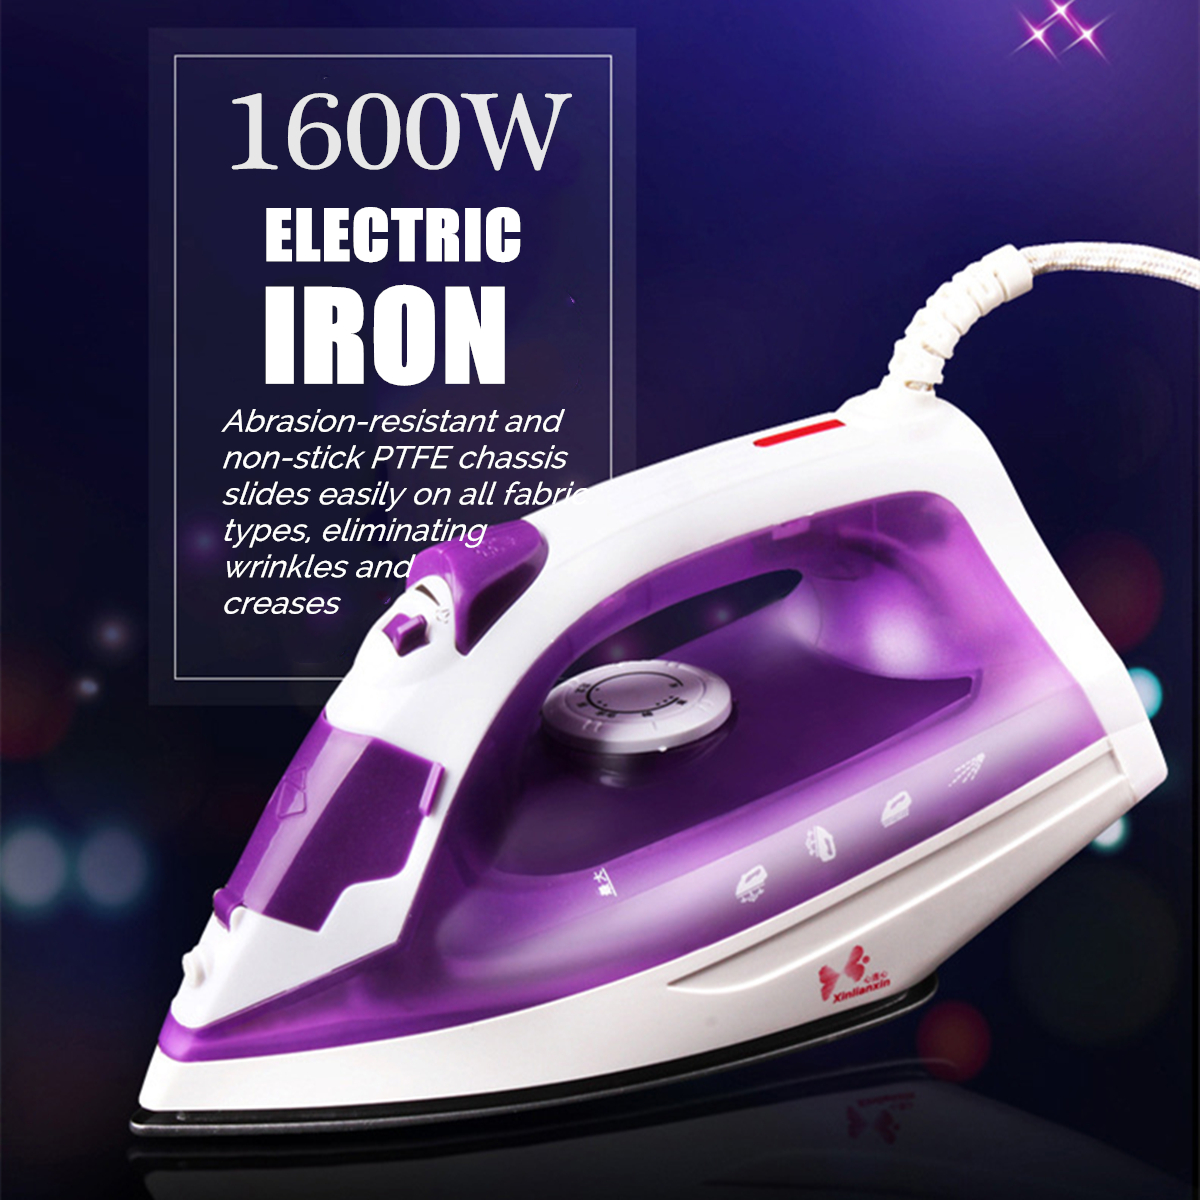 1600W-220V-Handheld-Portable-Steam-Iron-Electric-Garment-Cleaner-5-speed-Temperature-Adjustment-1744438-1